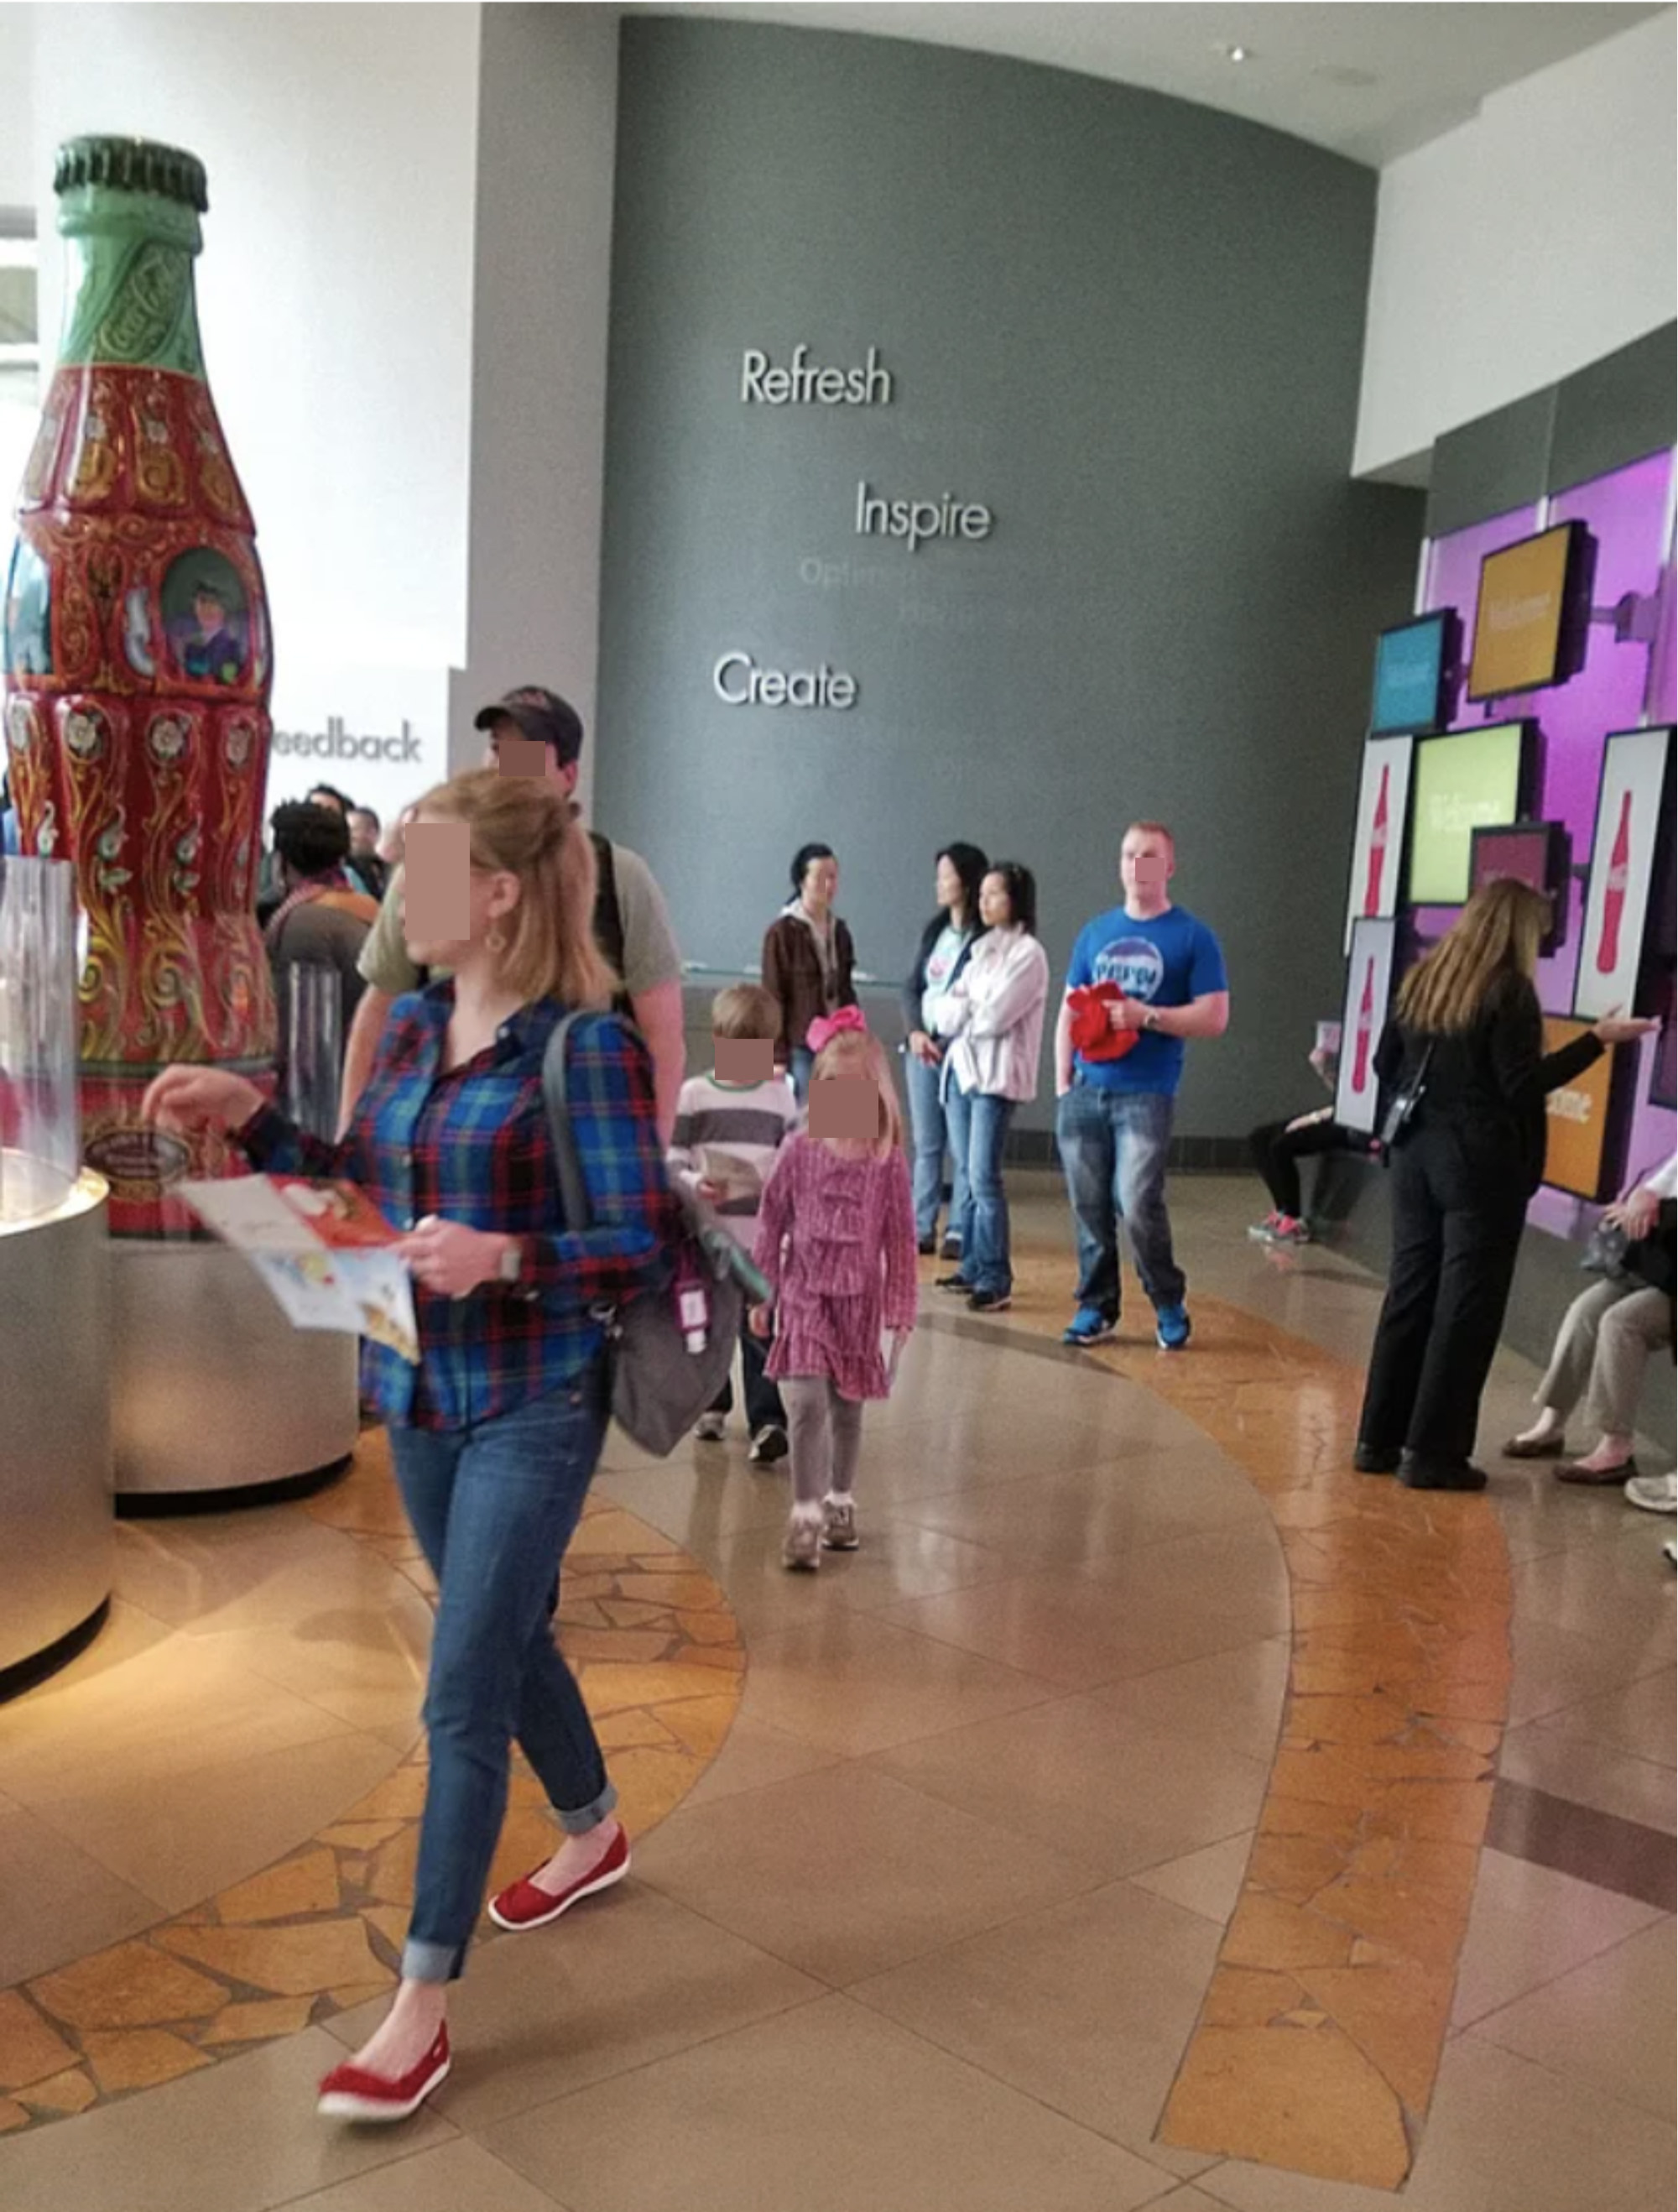 People at the Coca Cola museum